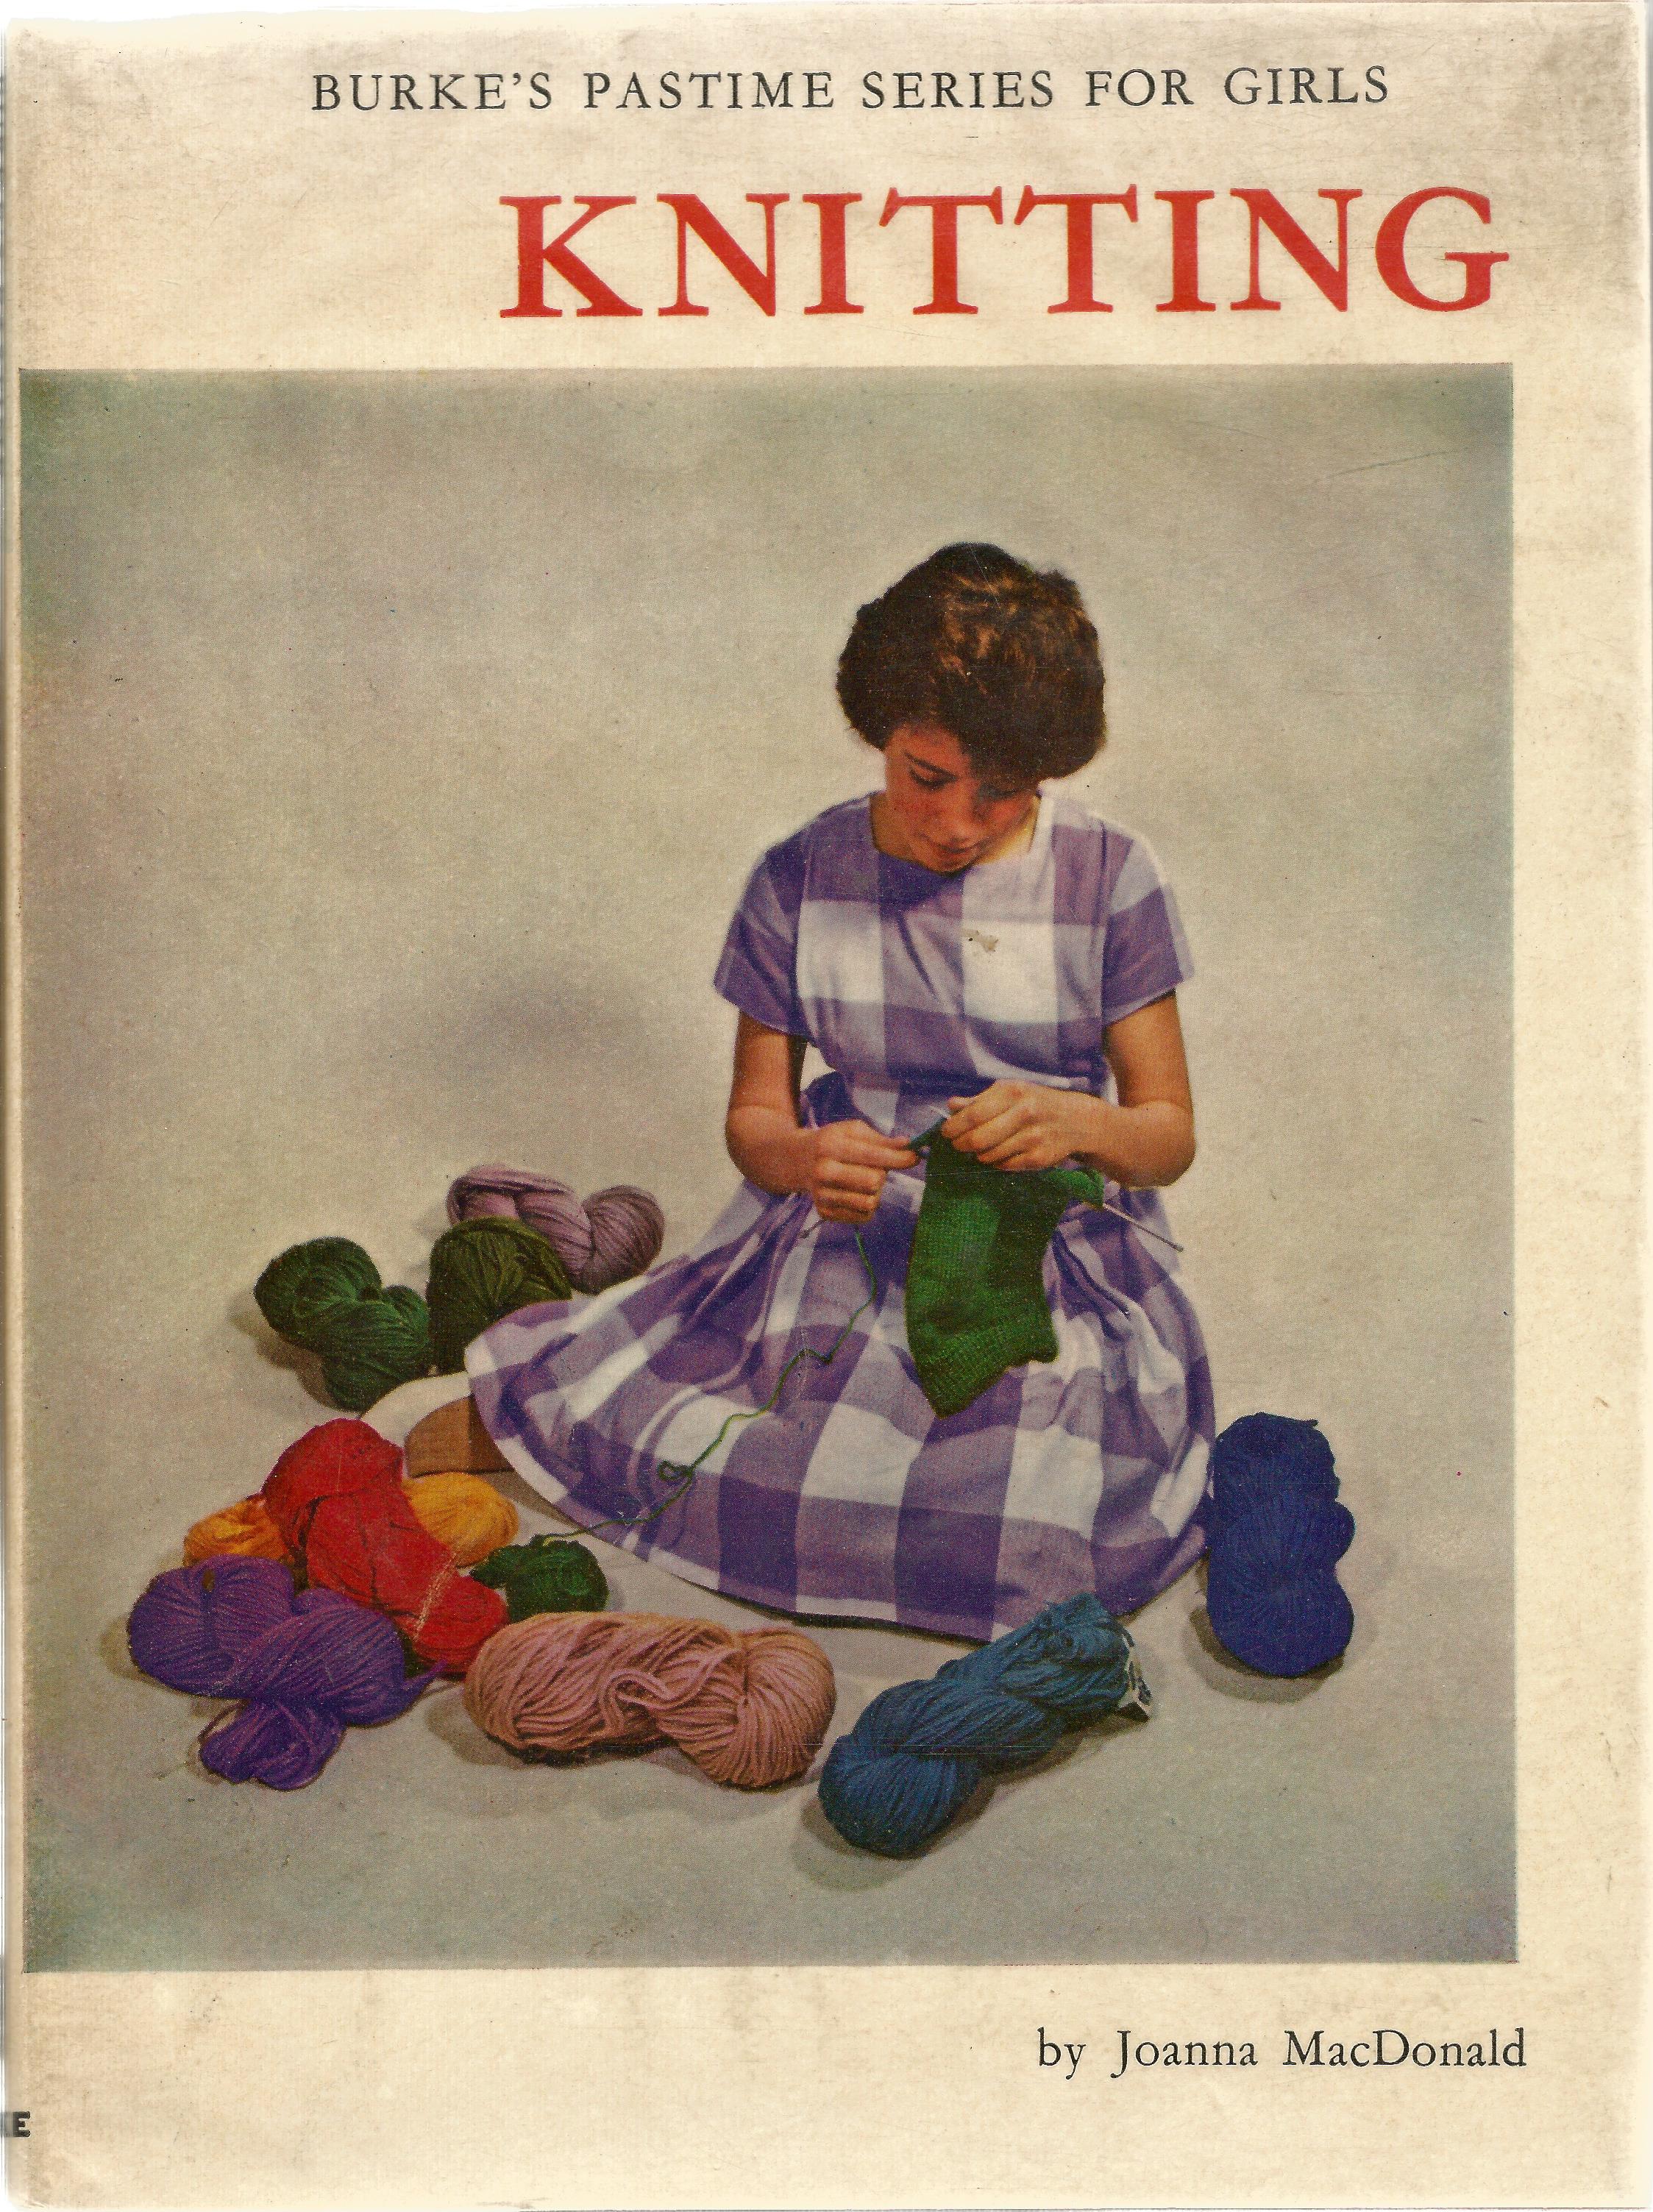 Burke Publishing Co Ltd publication Knitting by Joanna MacDonald 1962 in good condition. Sold on